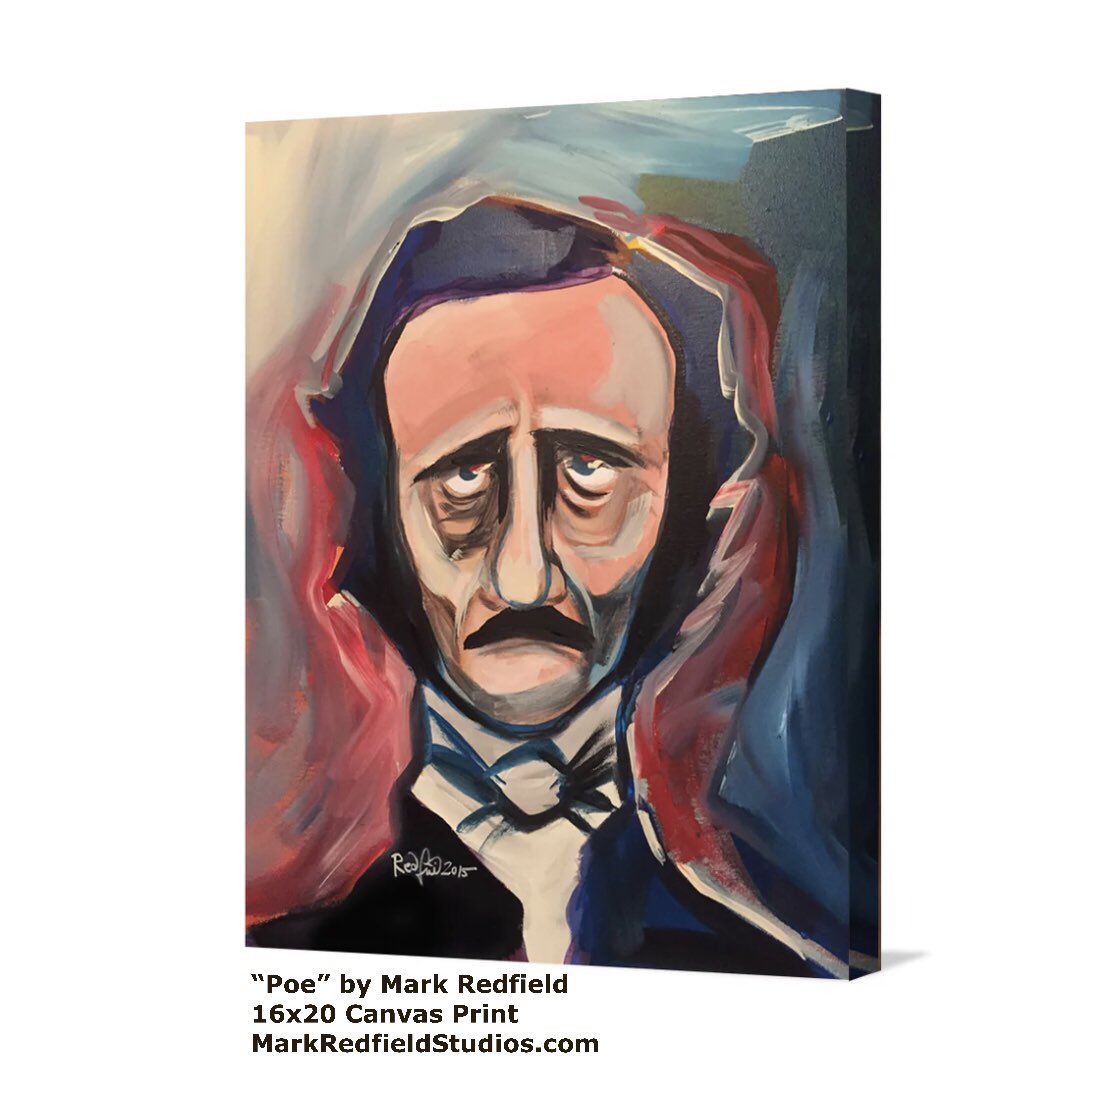 “Poe” by Mark Redfield 
16x20 Canvas Print
markredfieldstudios.com/products/poe-b…
Ready-To-Hang
MarkRedfieldStudios.com 

#EdgarAllanPoe #canvasprint #art